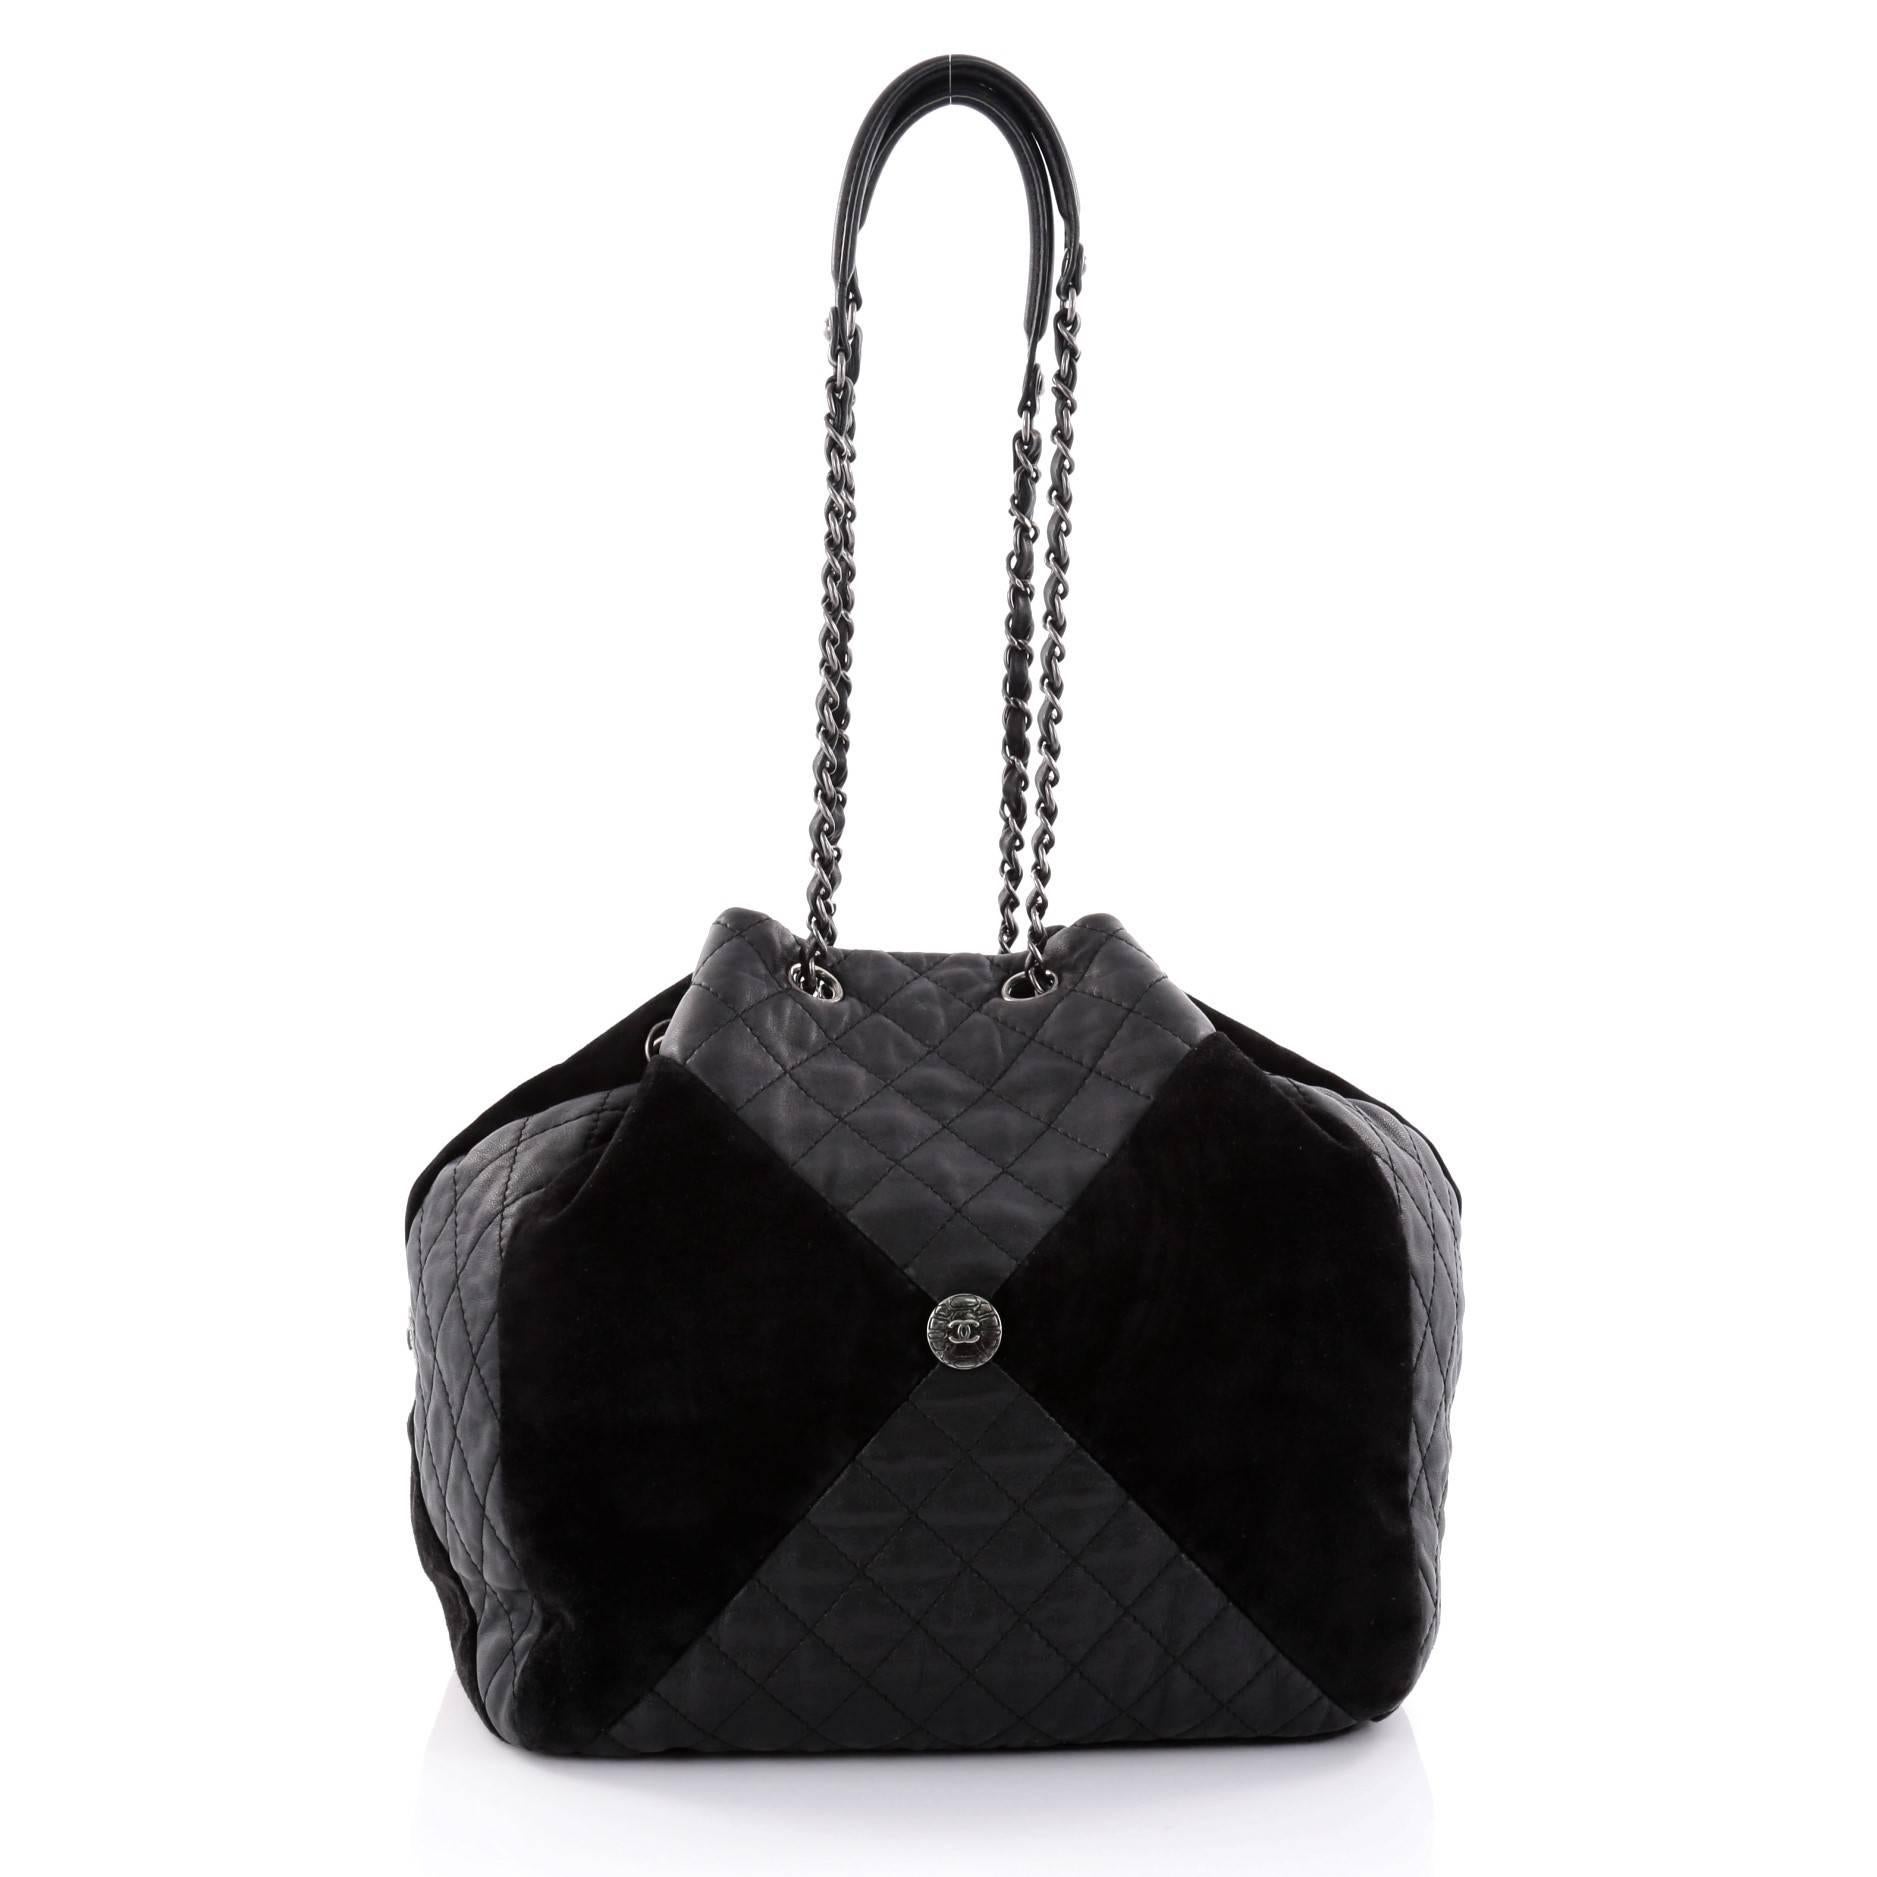 Black Chanel Patchwork Drawstring Bag Quilted Leather and Suede Large